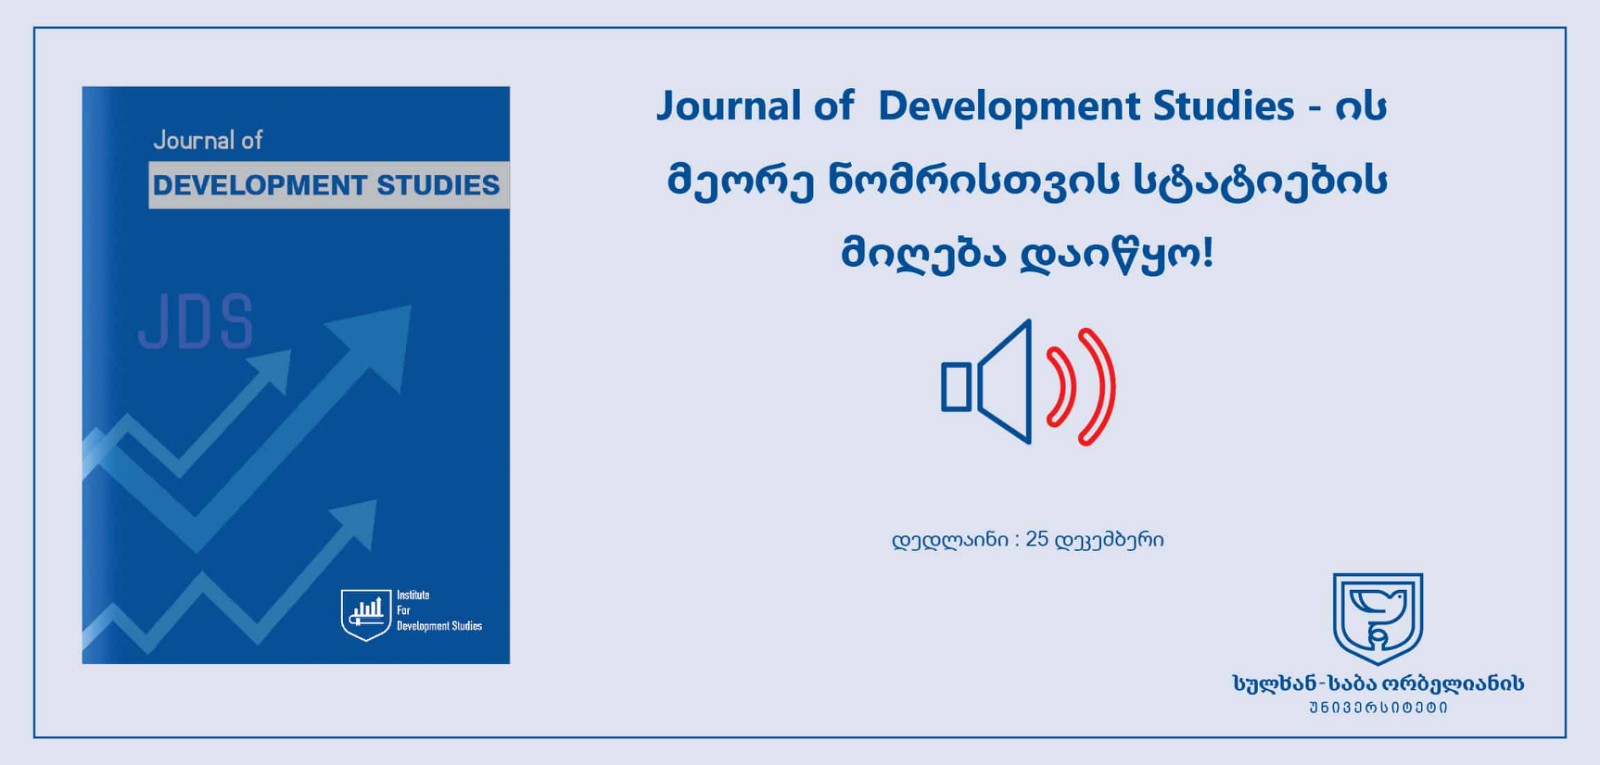 Call for the papers for the International Journal of Development Studies